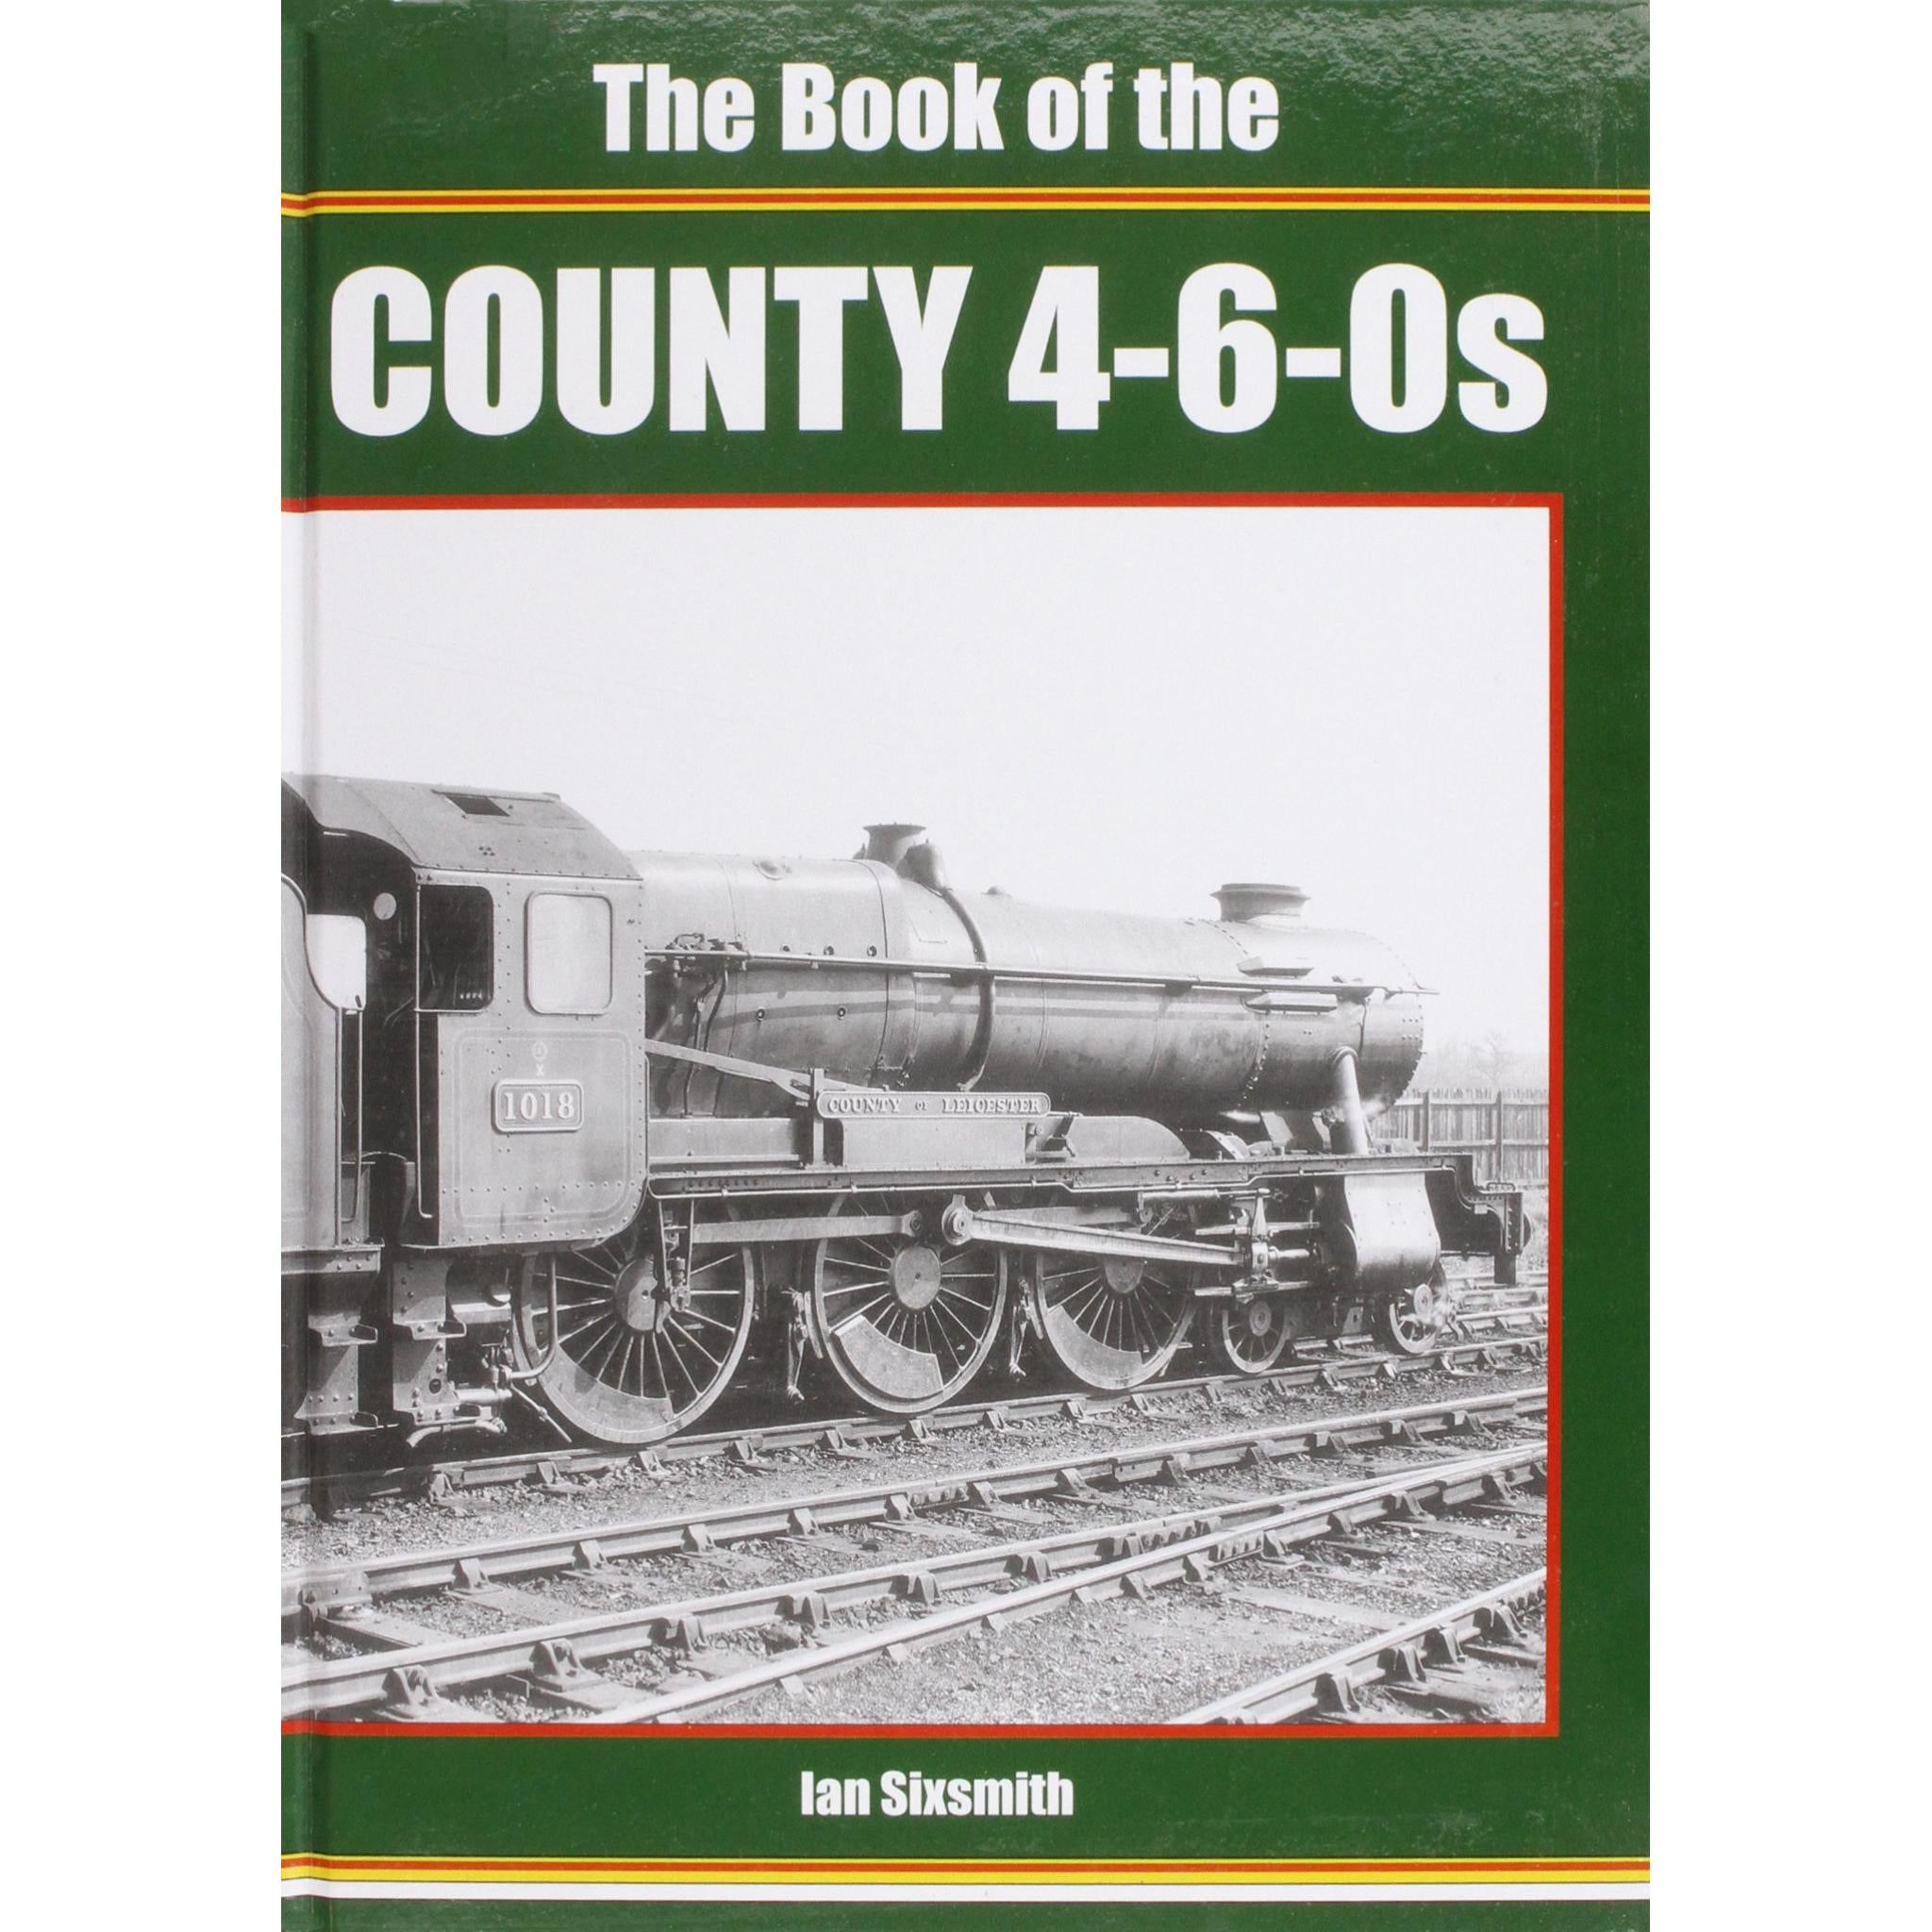 THE BOOK OF THE COUNTY 4-6-0s